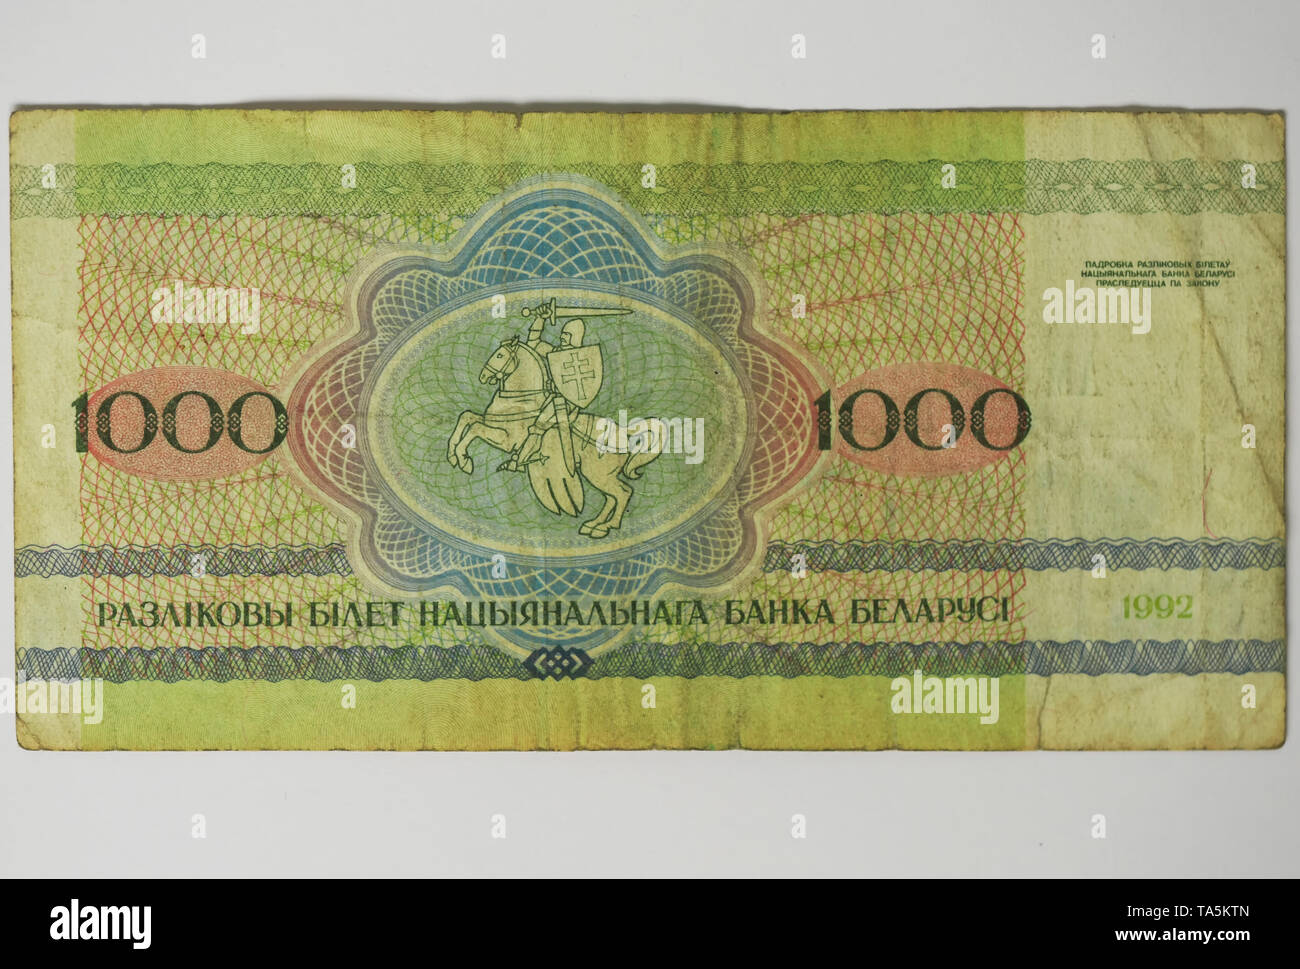 Treasury card of the National Bank of Belarus worth one thousand rubles, second-hand, paper money close-up Stock Photo